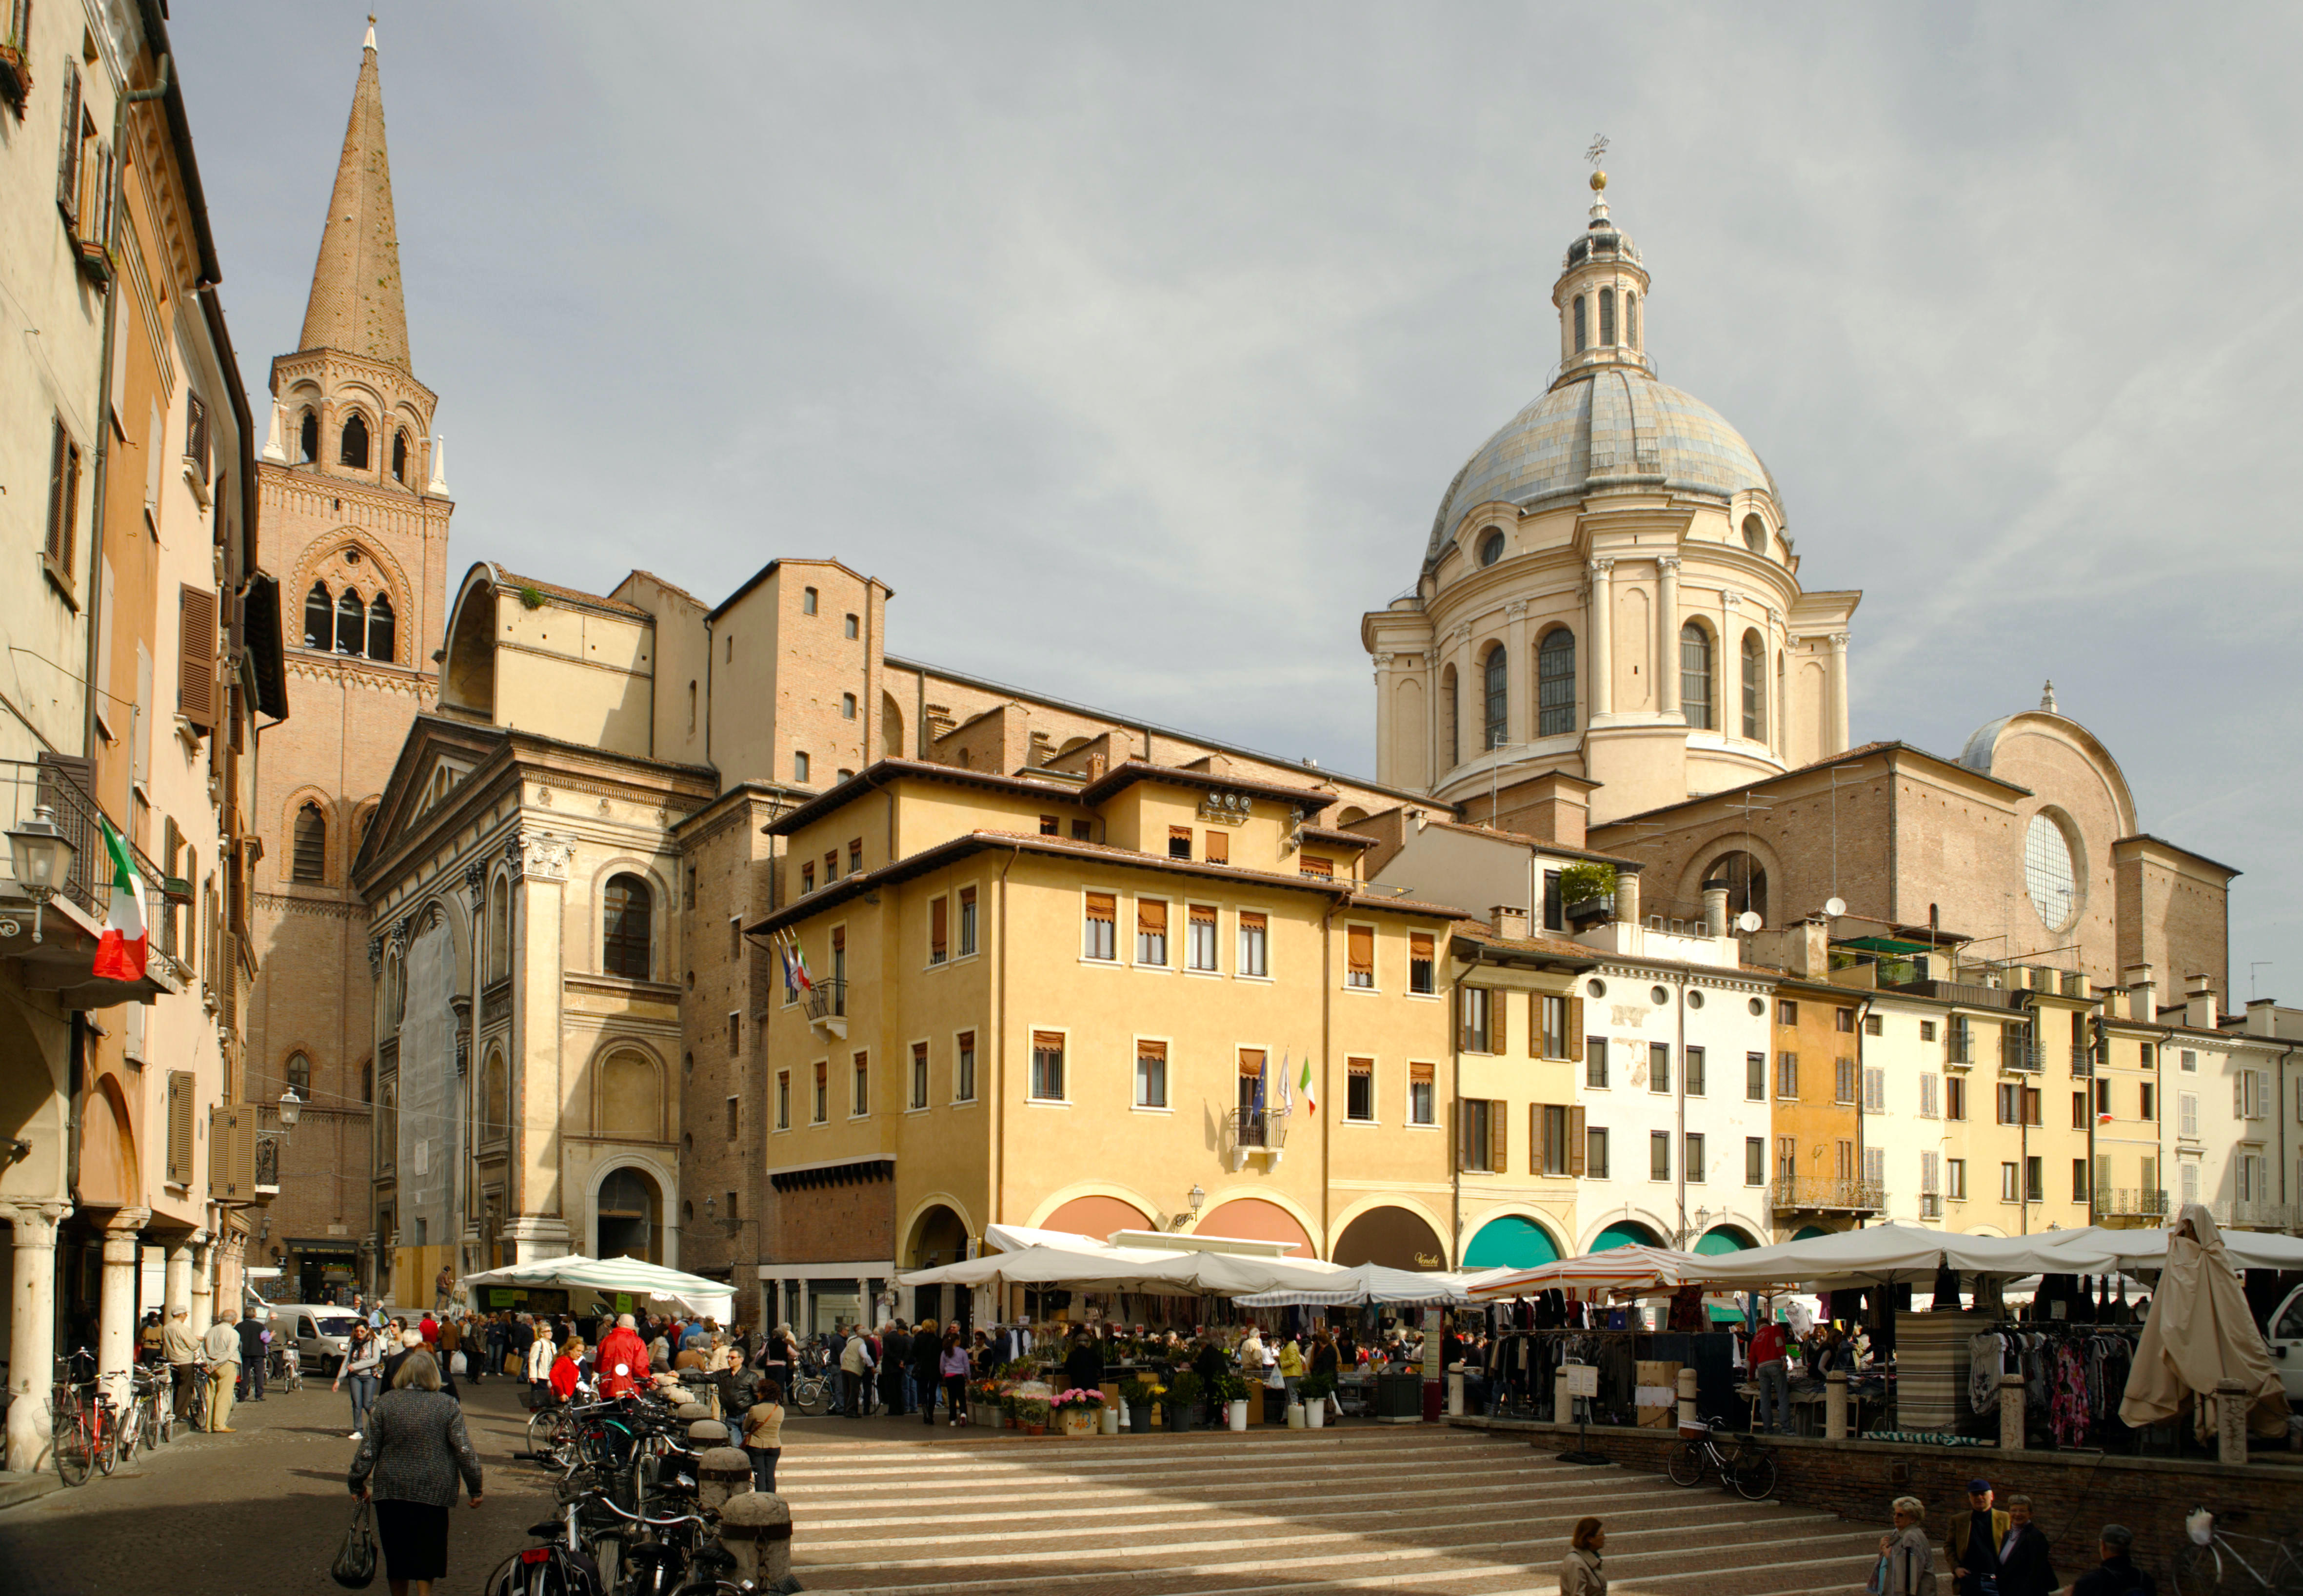 A photo of the town square in Mantua, Italy. There is a tall church dome and a spire. There are municipal buildings with an italian flags hanging from the window. There are market stalls with shoppers gathered round and groups of people chatting. On the left there is a covered walkway.